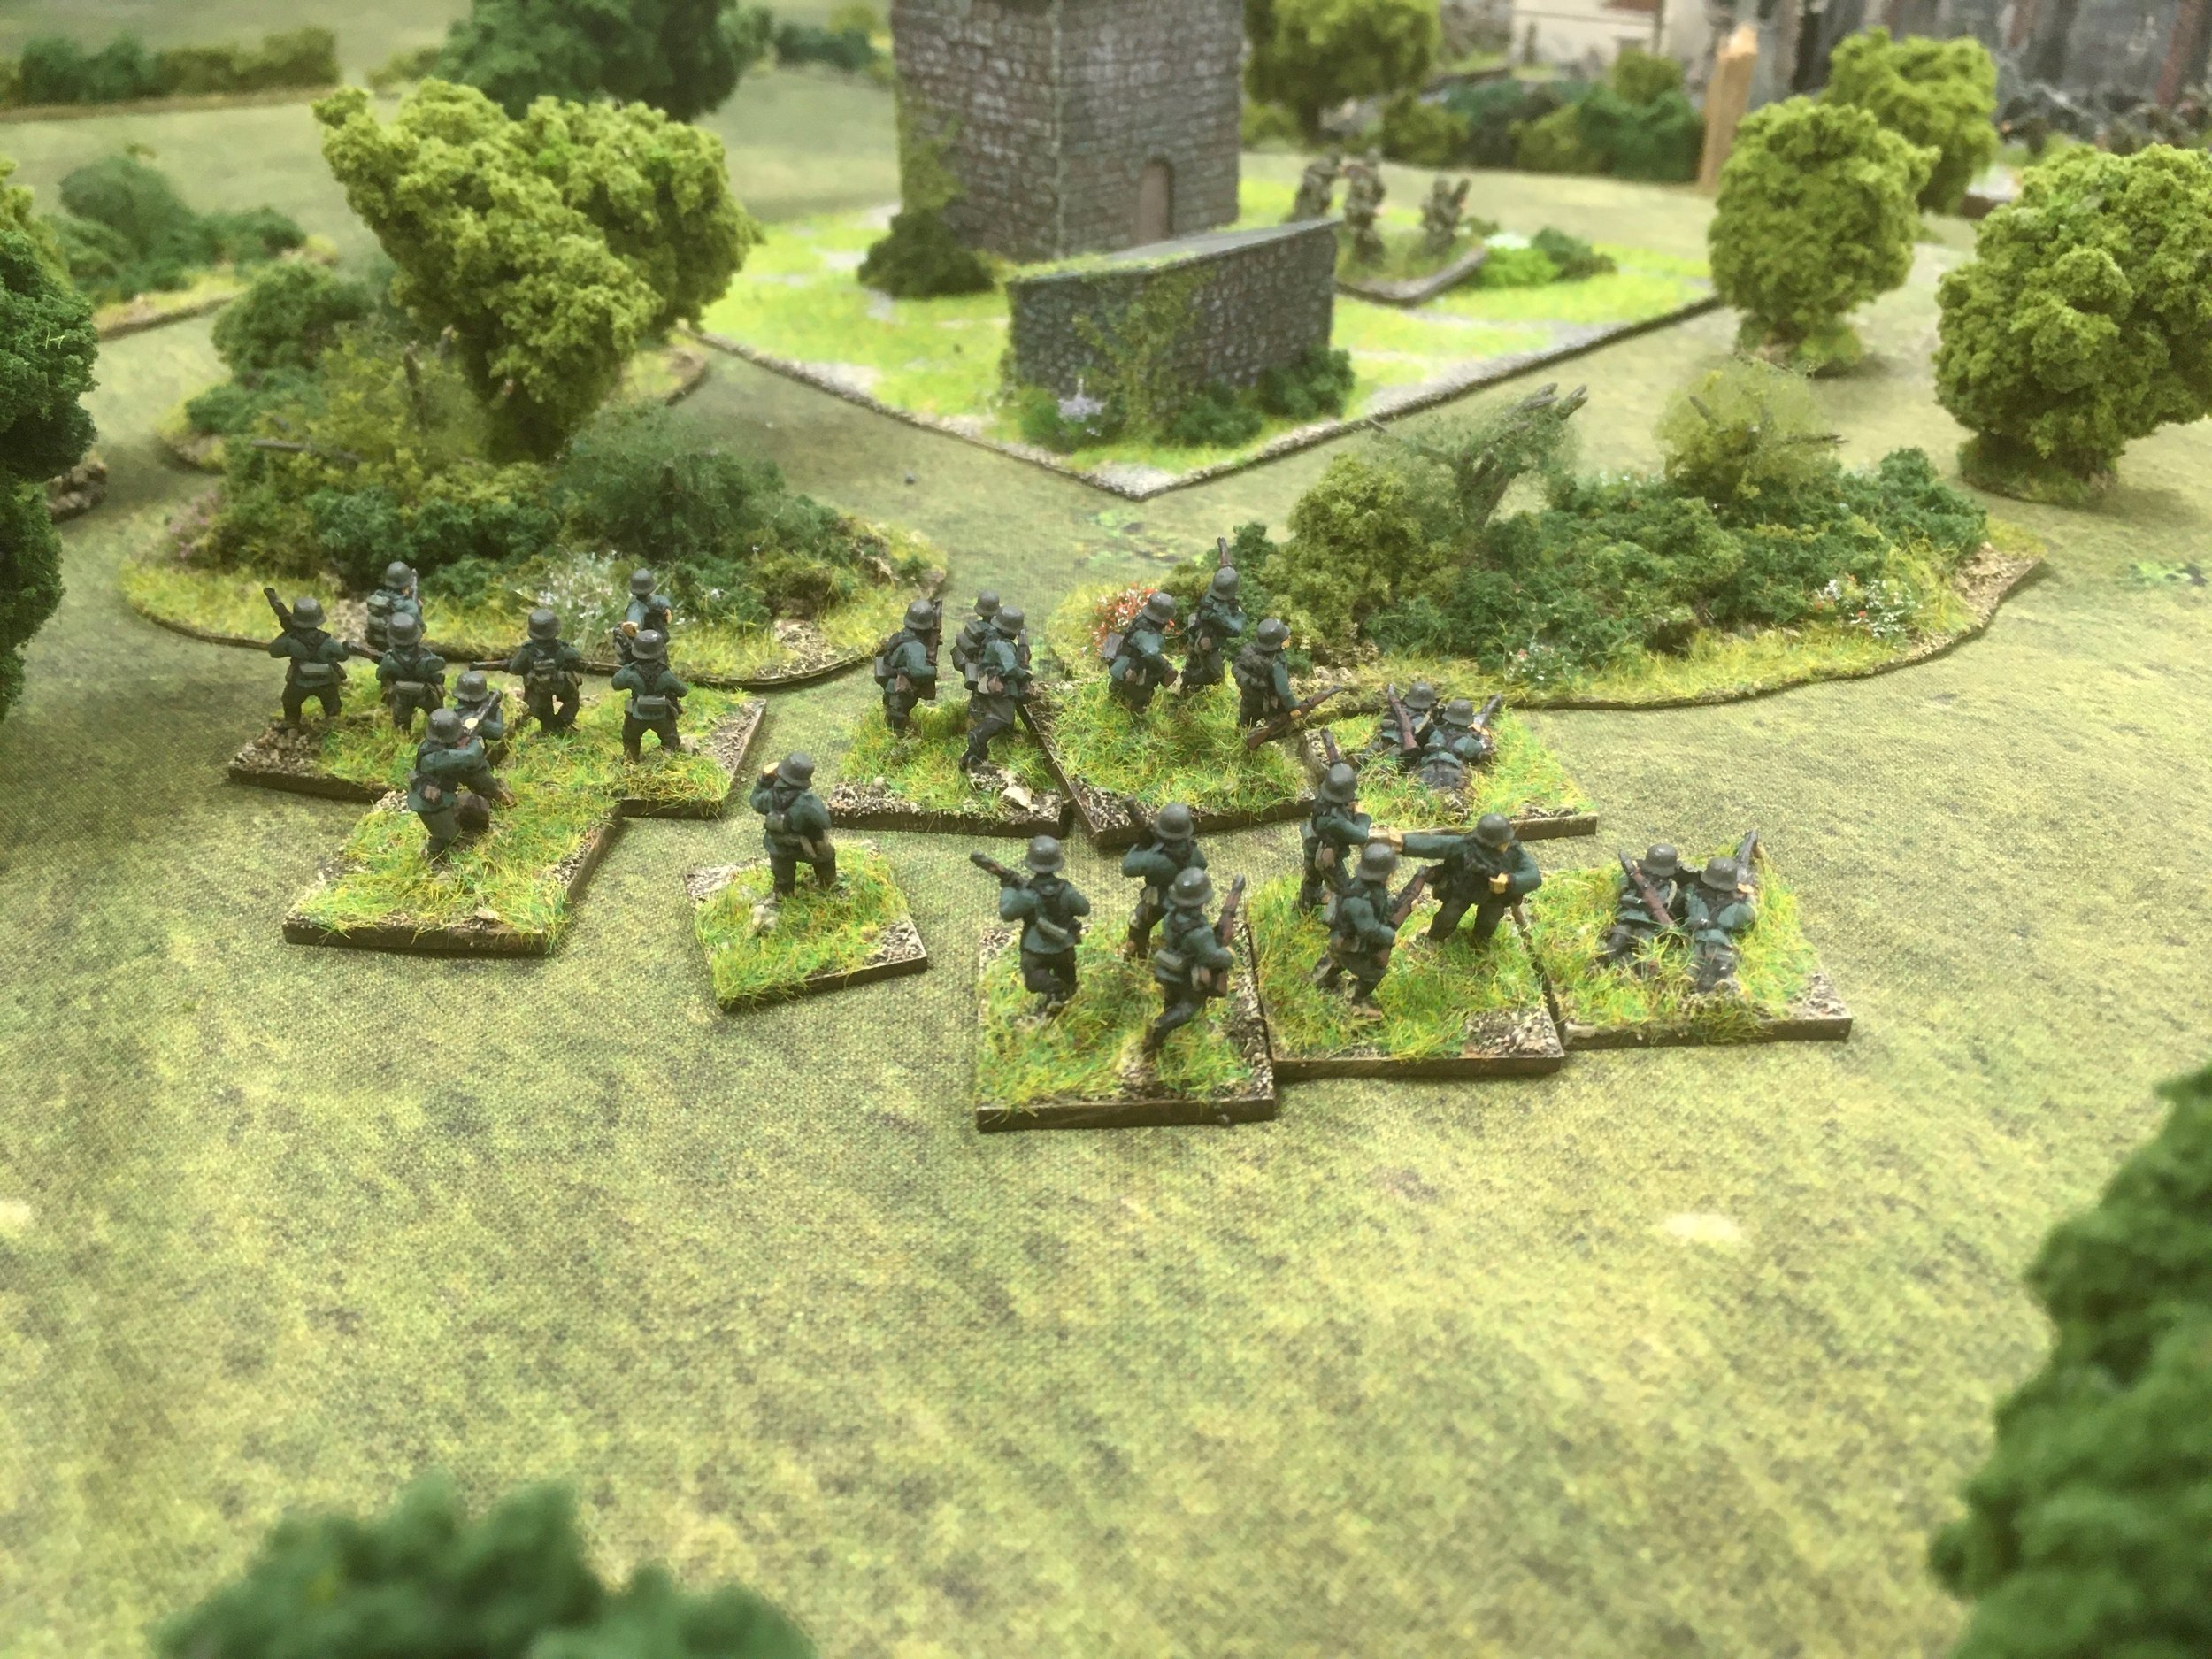 The third disembark their lorry and advance into the wood.